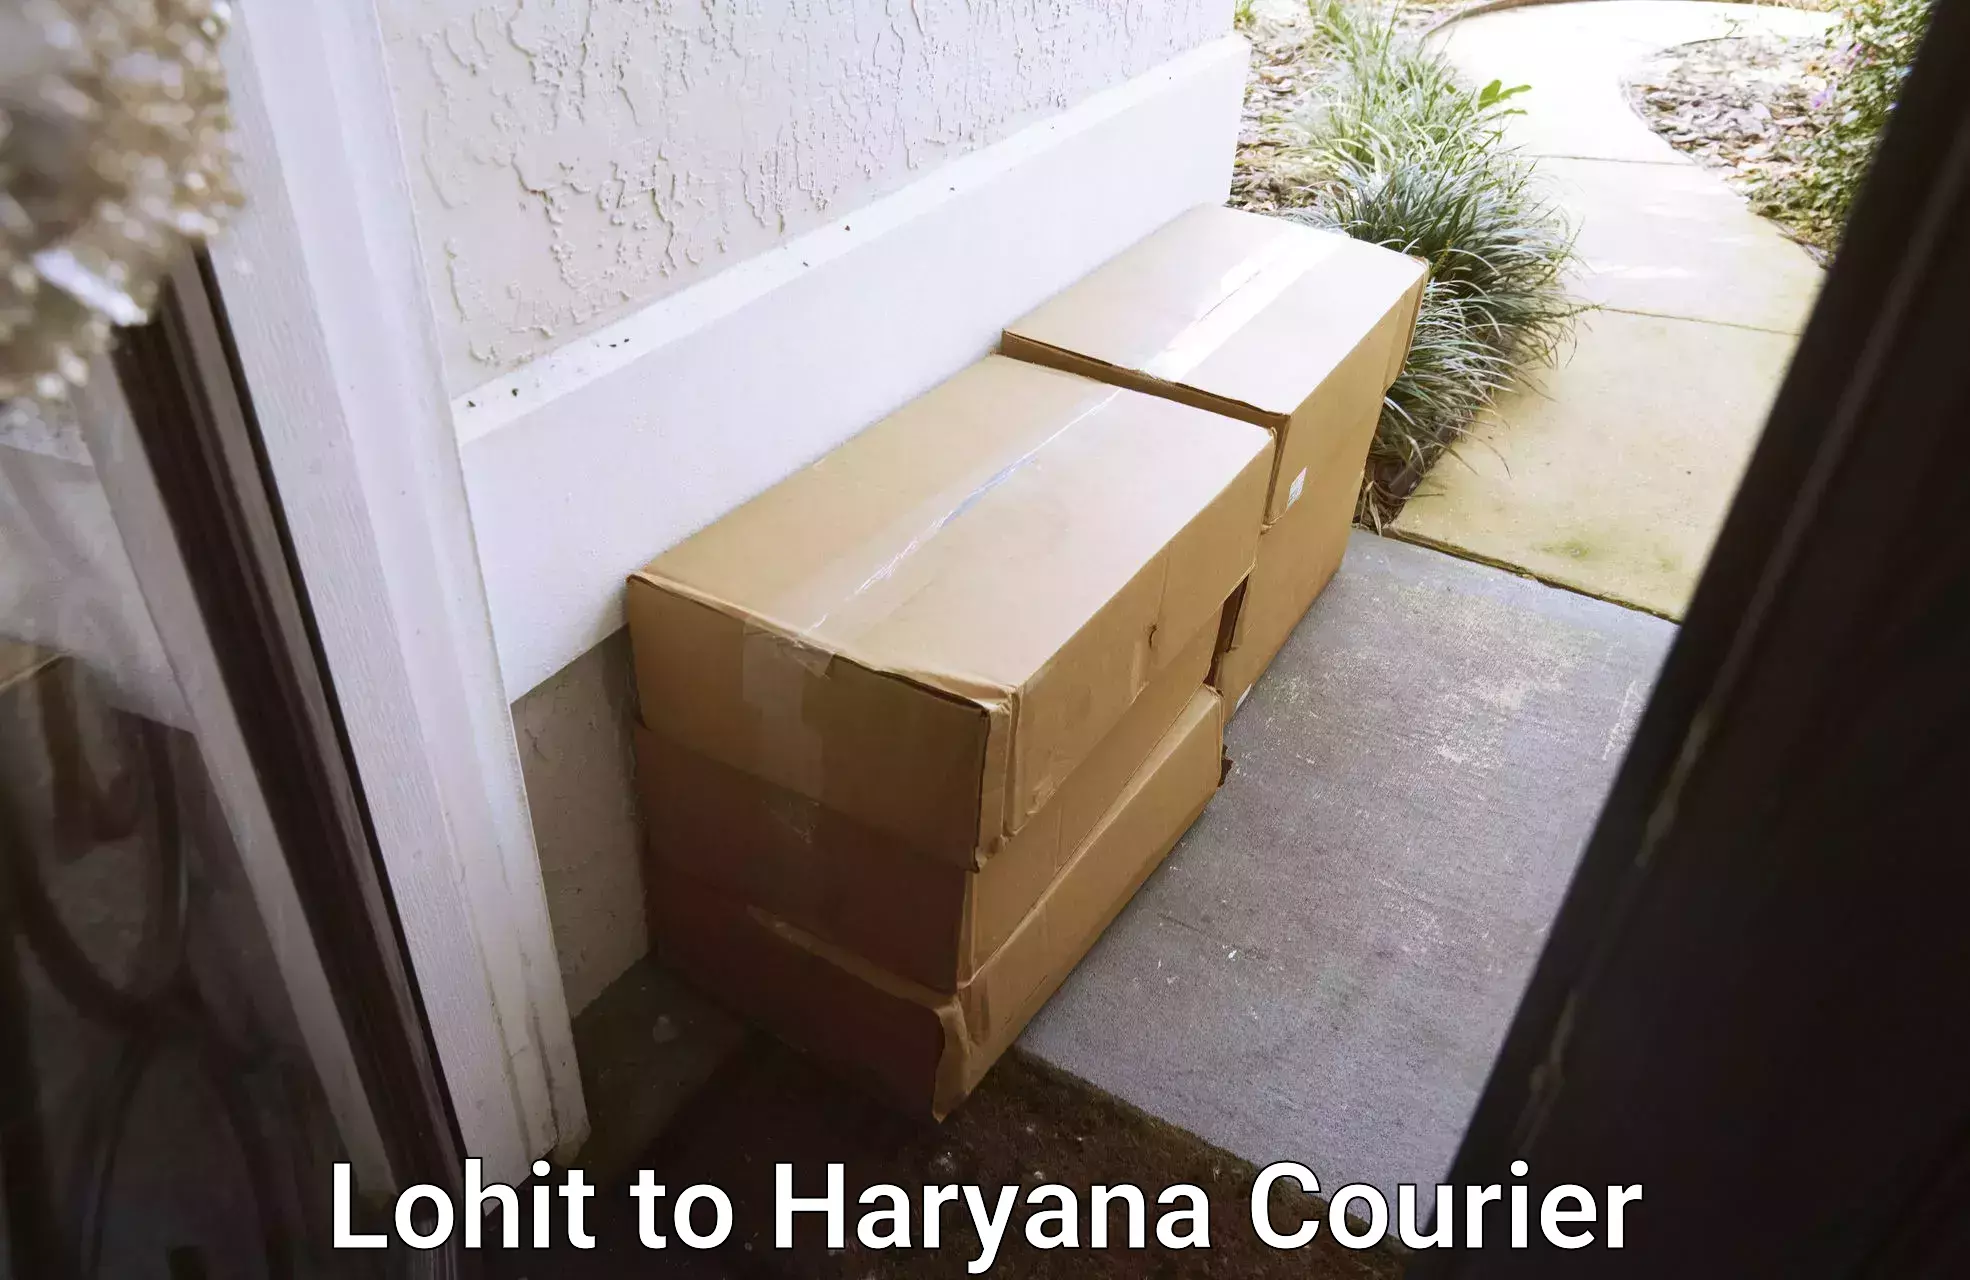 Flexible delivery schedules Lohit to Bilaspur Haryana